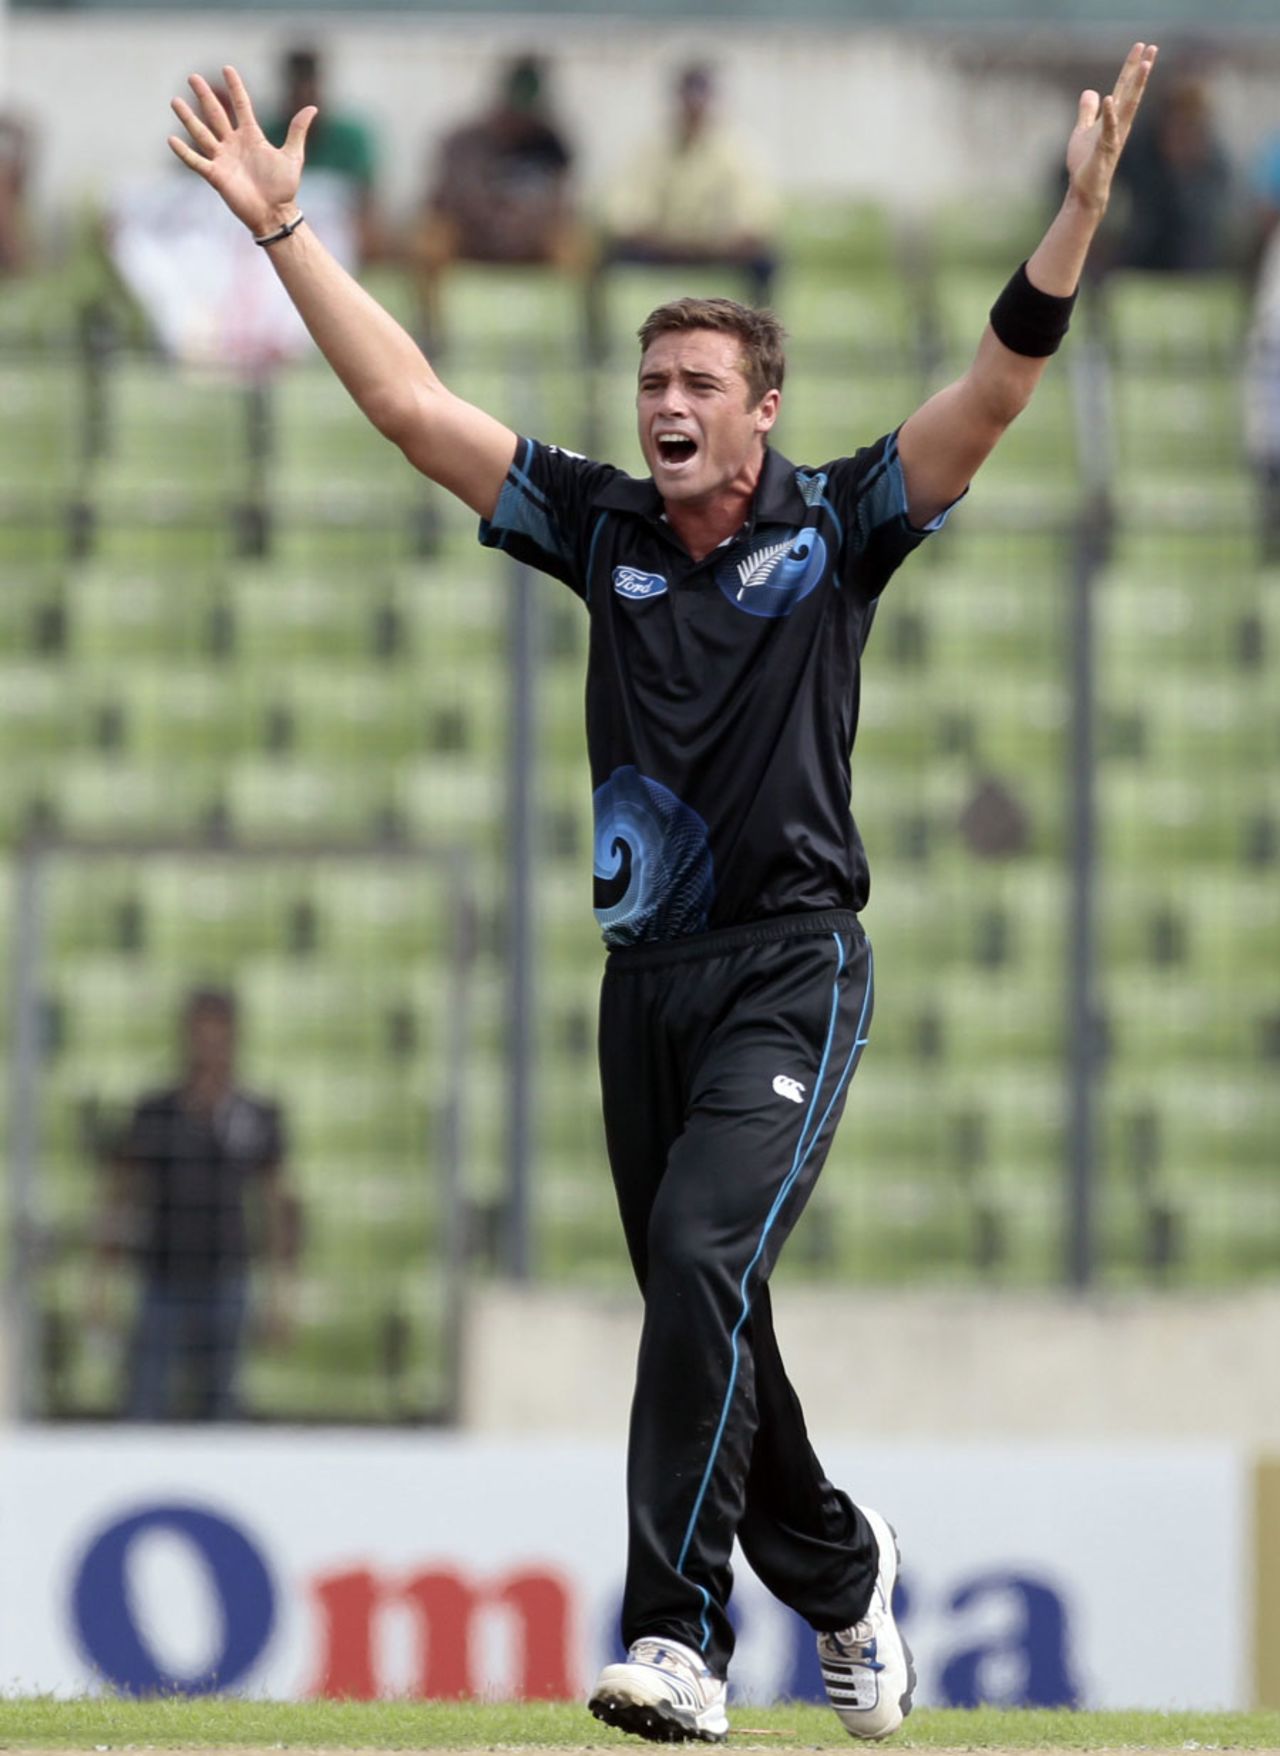 Tim Southee picked up three wickets, Bangladesh v New Zealand, 1st ODI, Mirpur, October 29, 2013